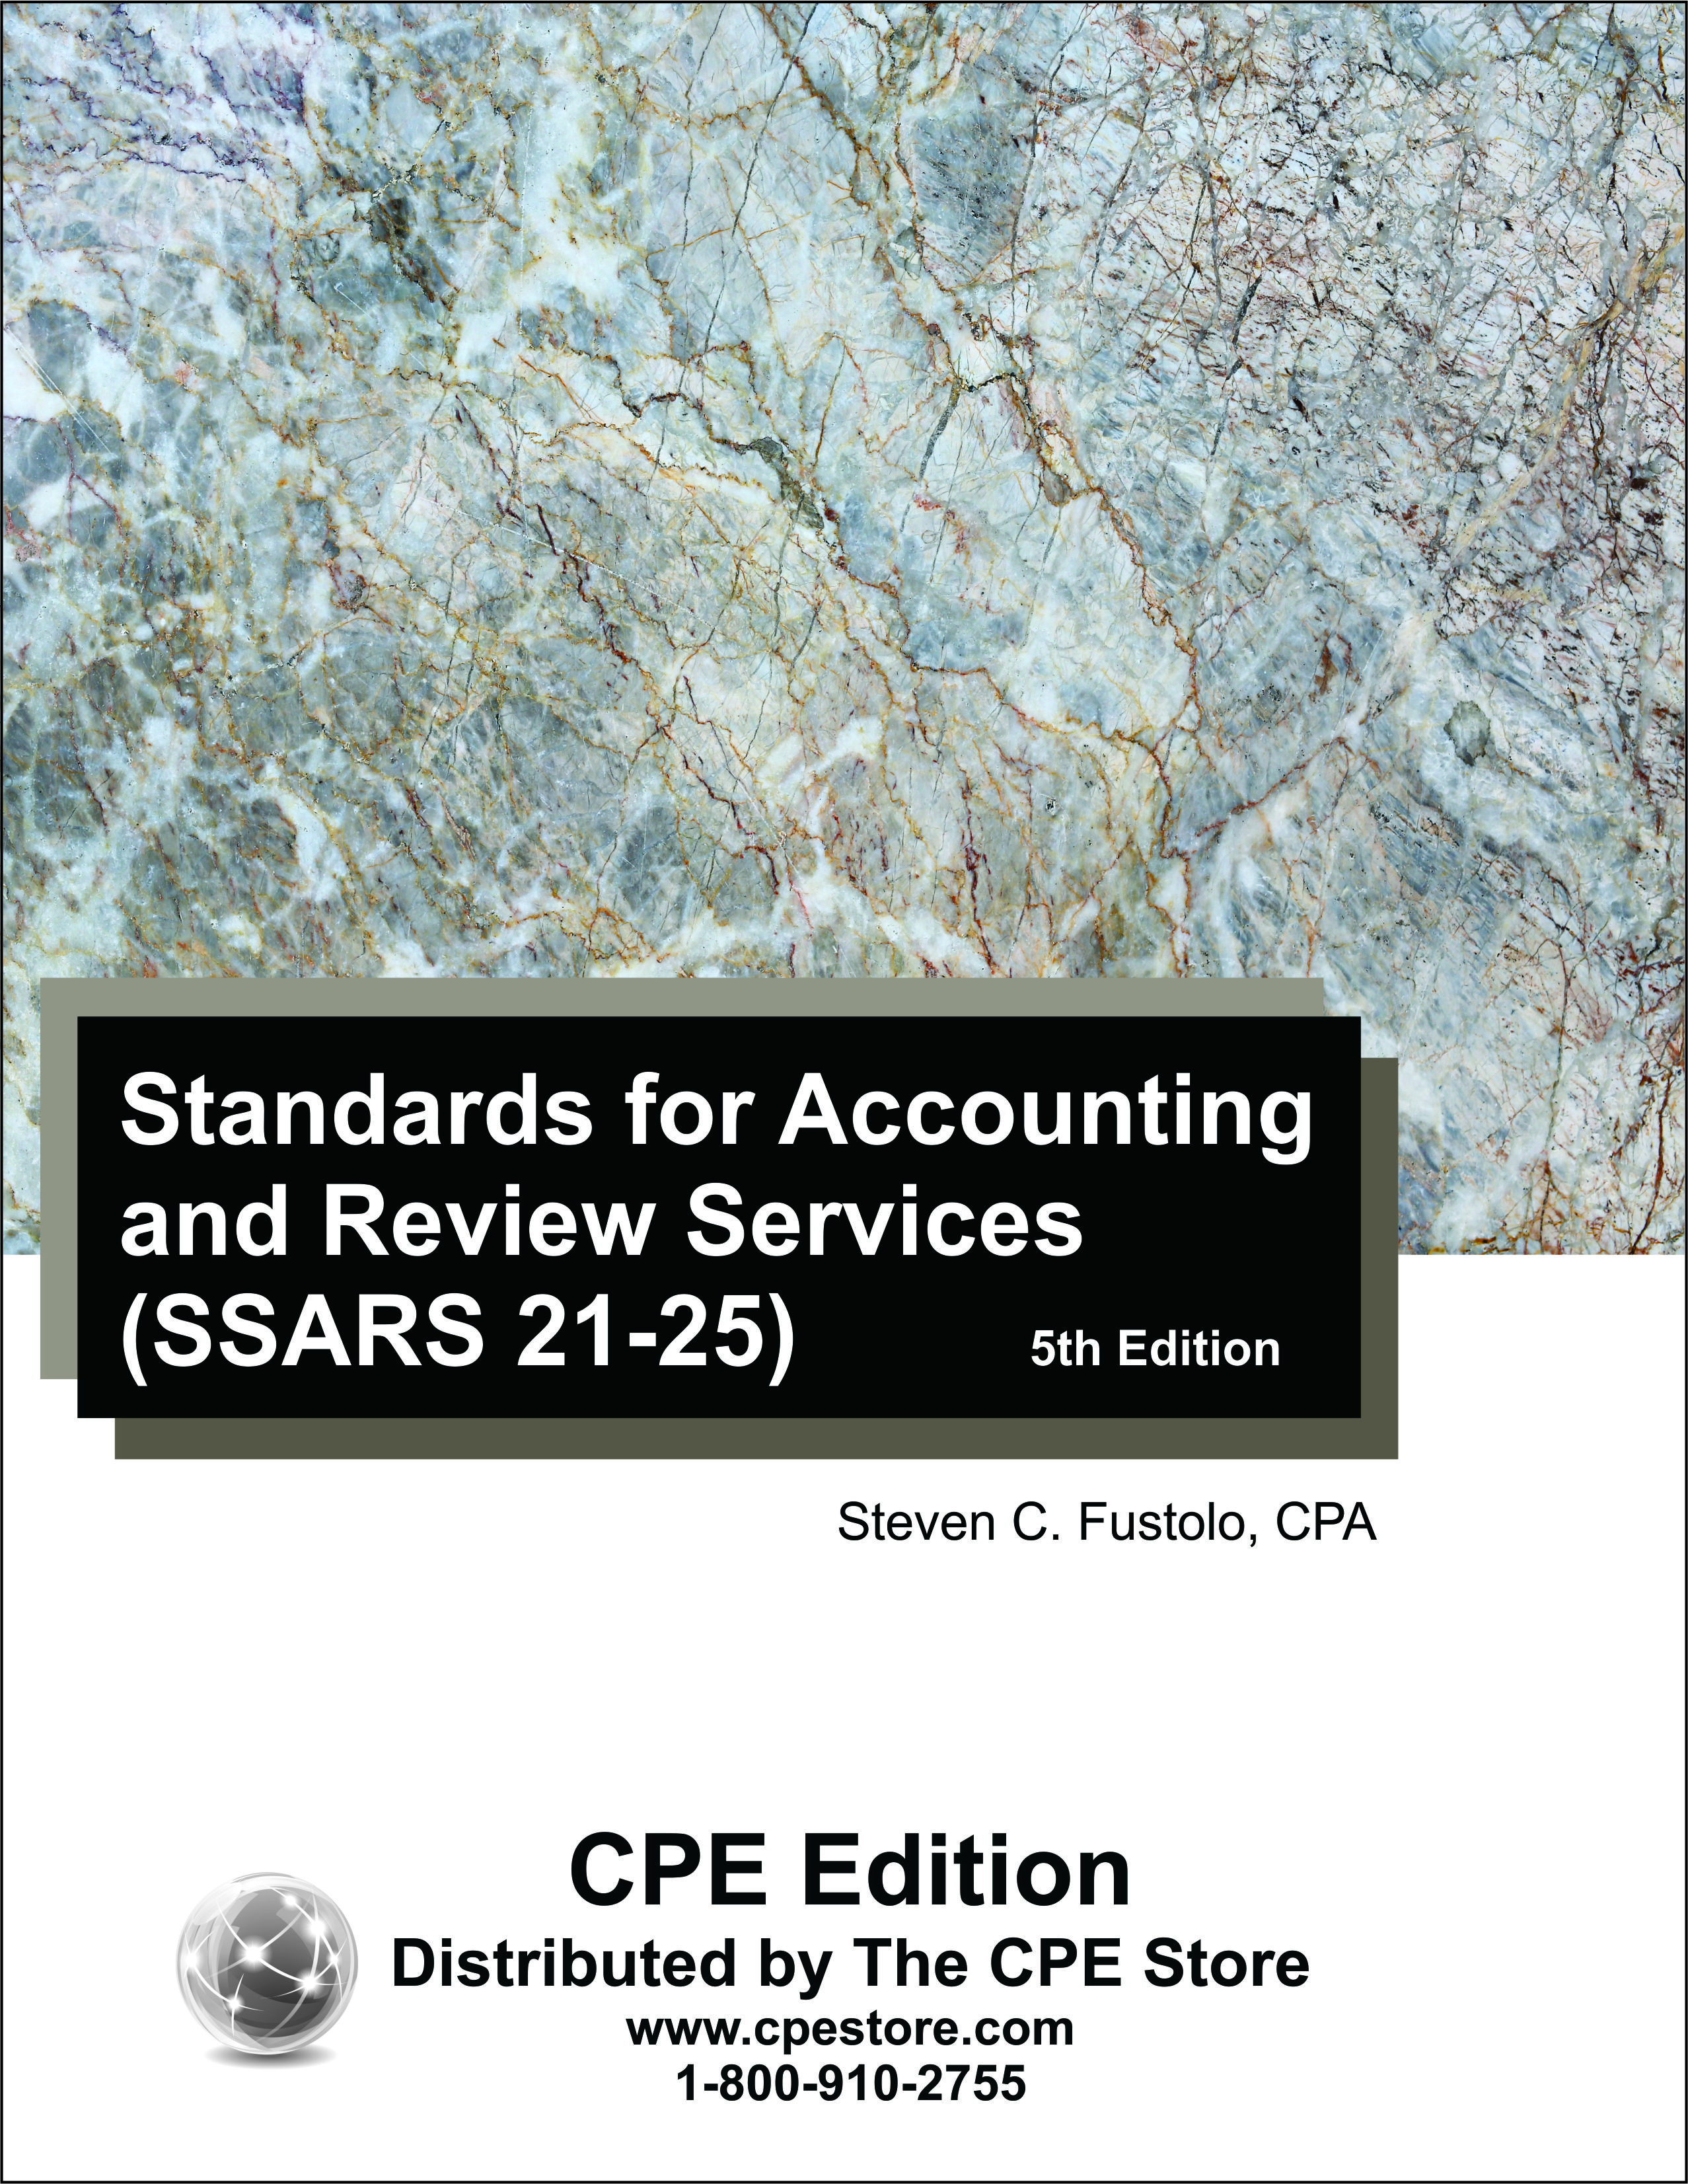 Standards for Accounting and Review Services (SSARS 21-25)